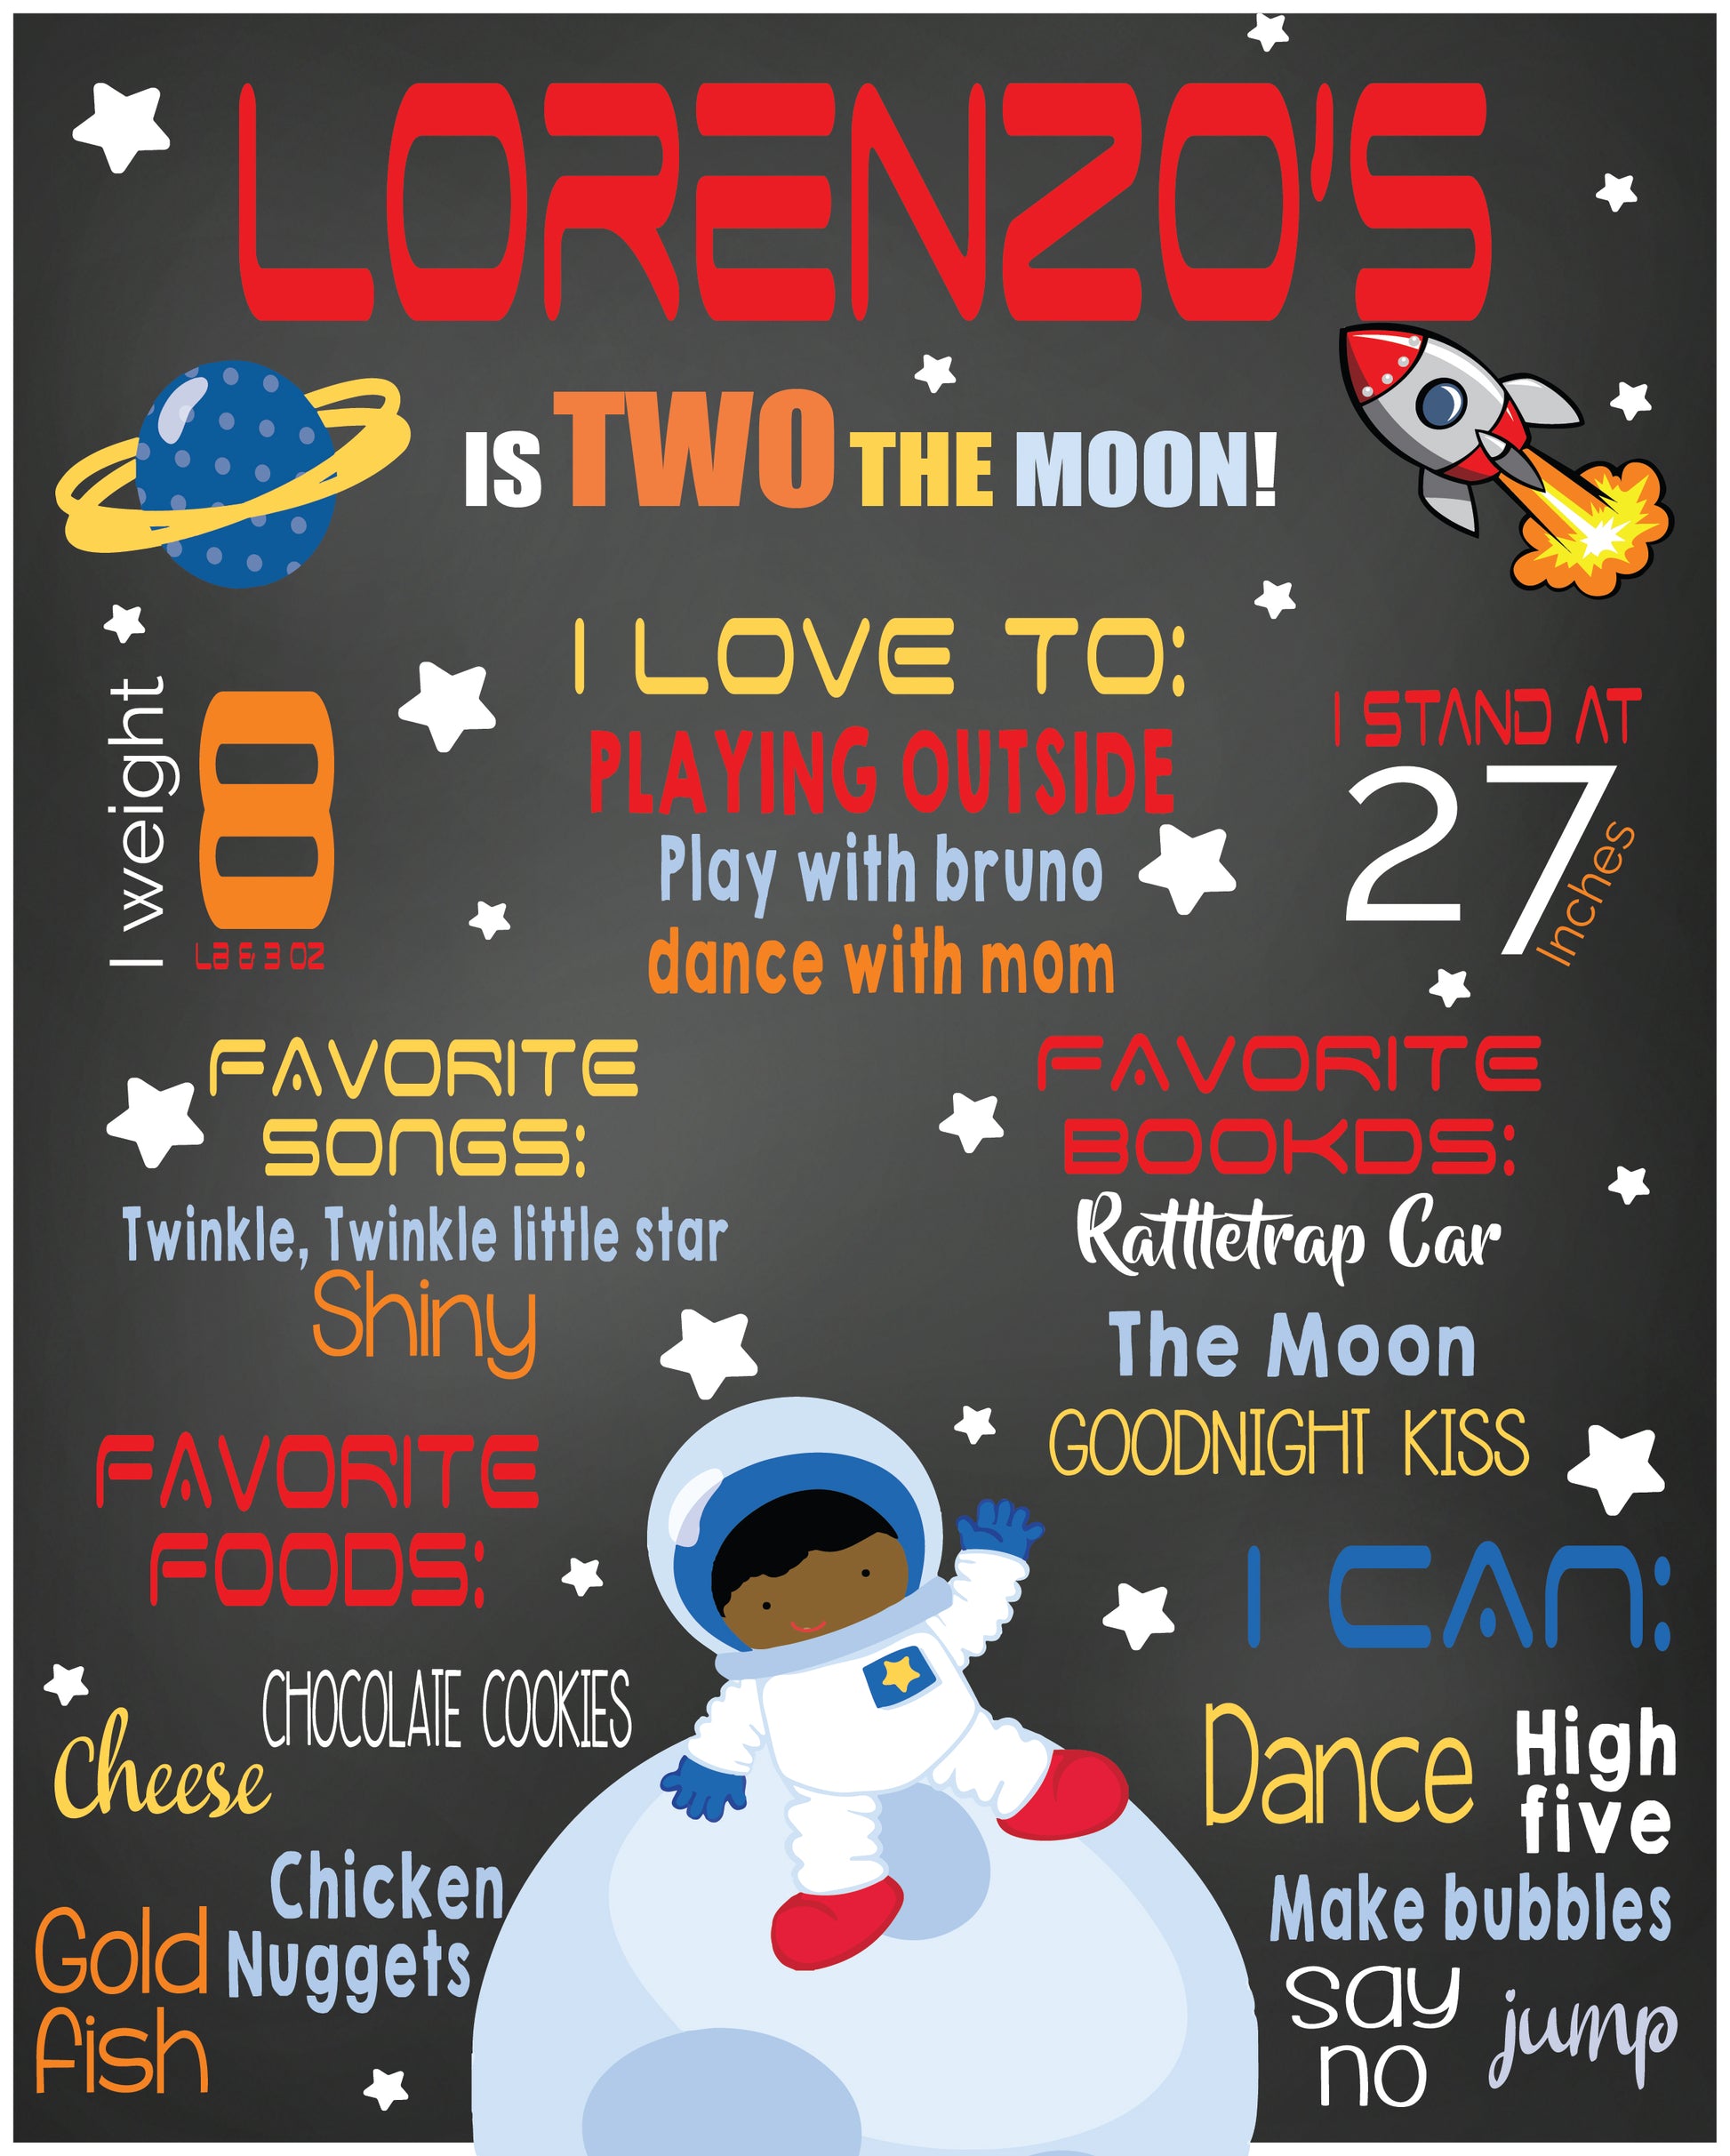 two the moon Afro American astronaut poster